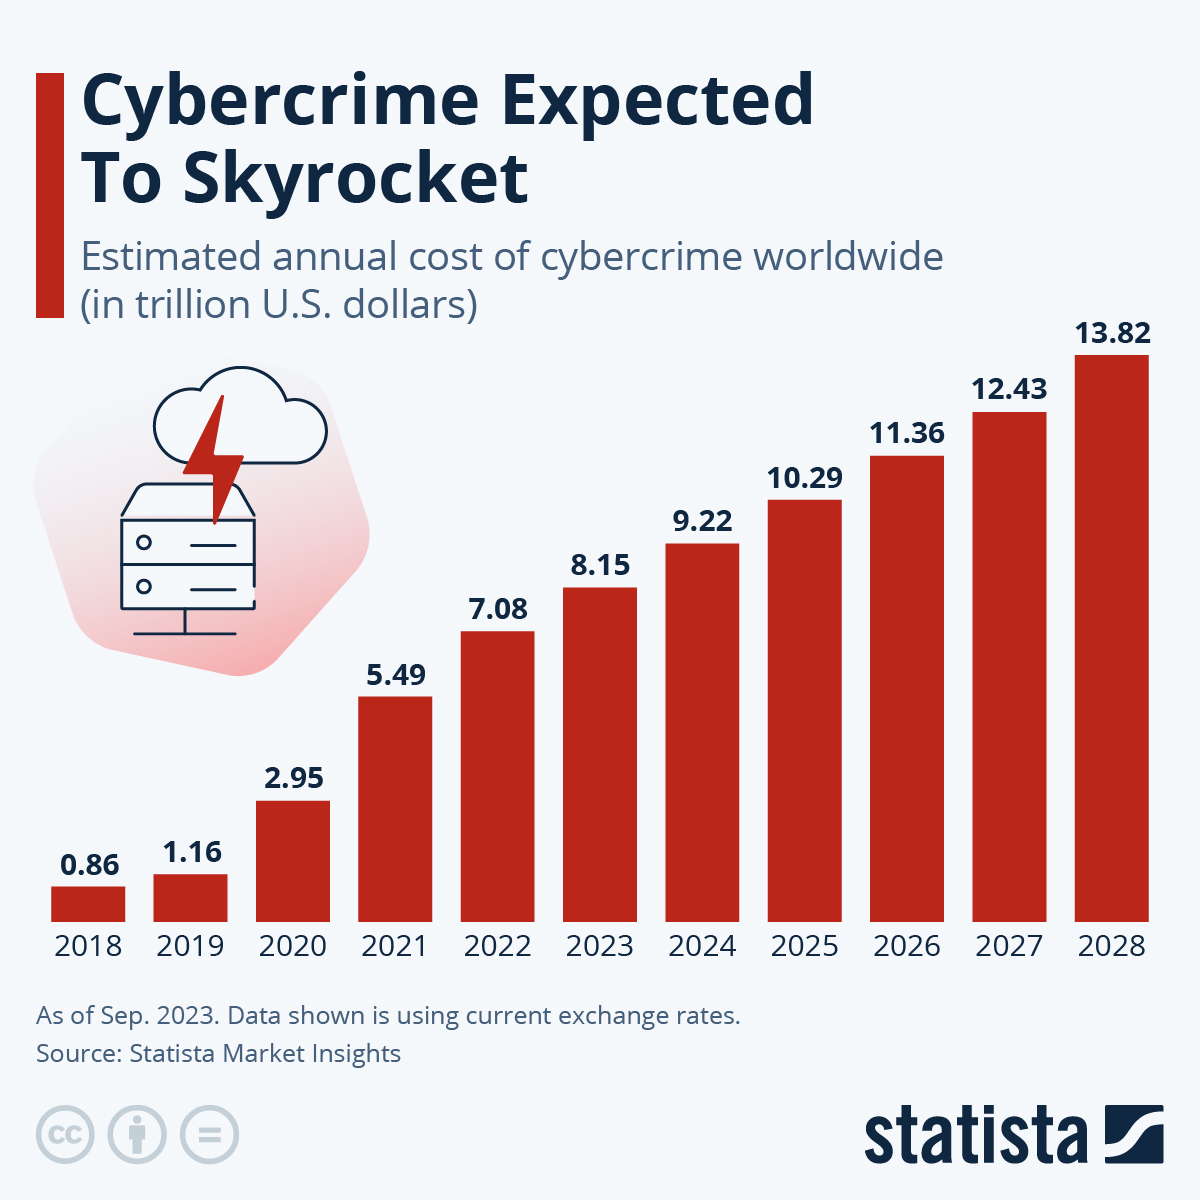 Source : https://www.statista.com/chart/28878/expected-cost-of-cybercrime-until-2027/